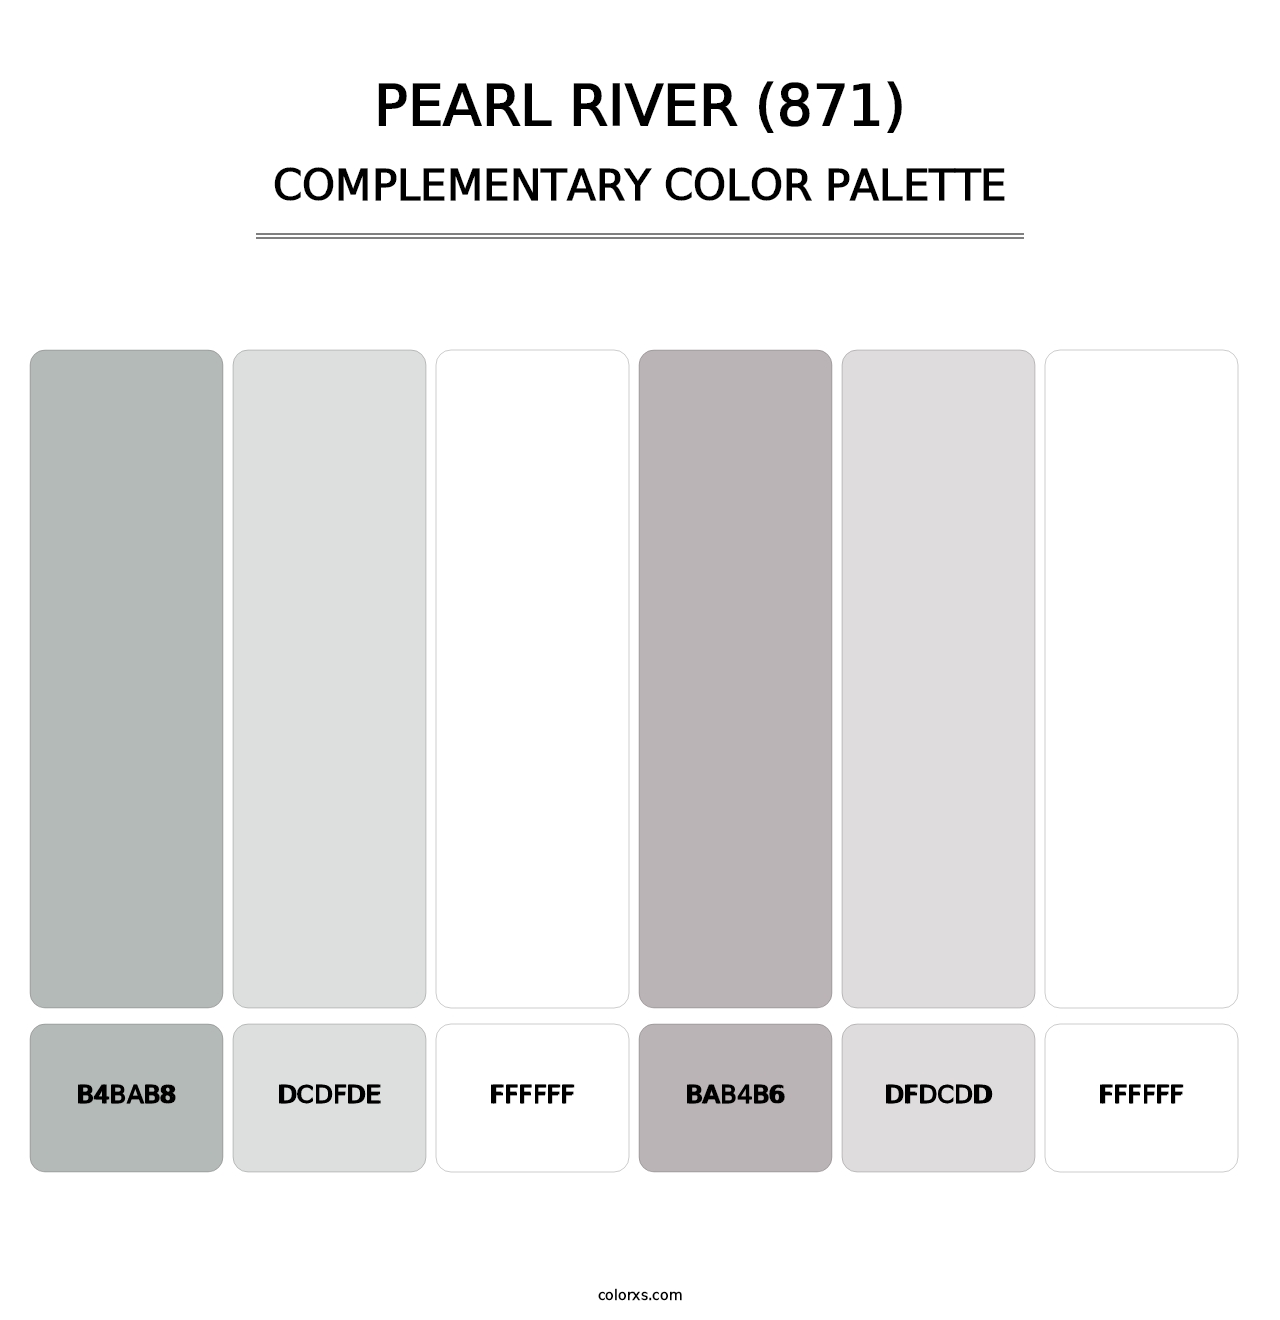 Pearl River (871) - Complementary Color Palette